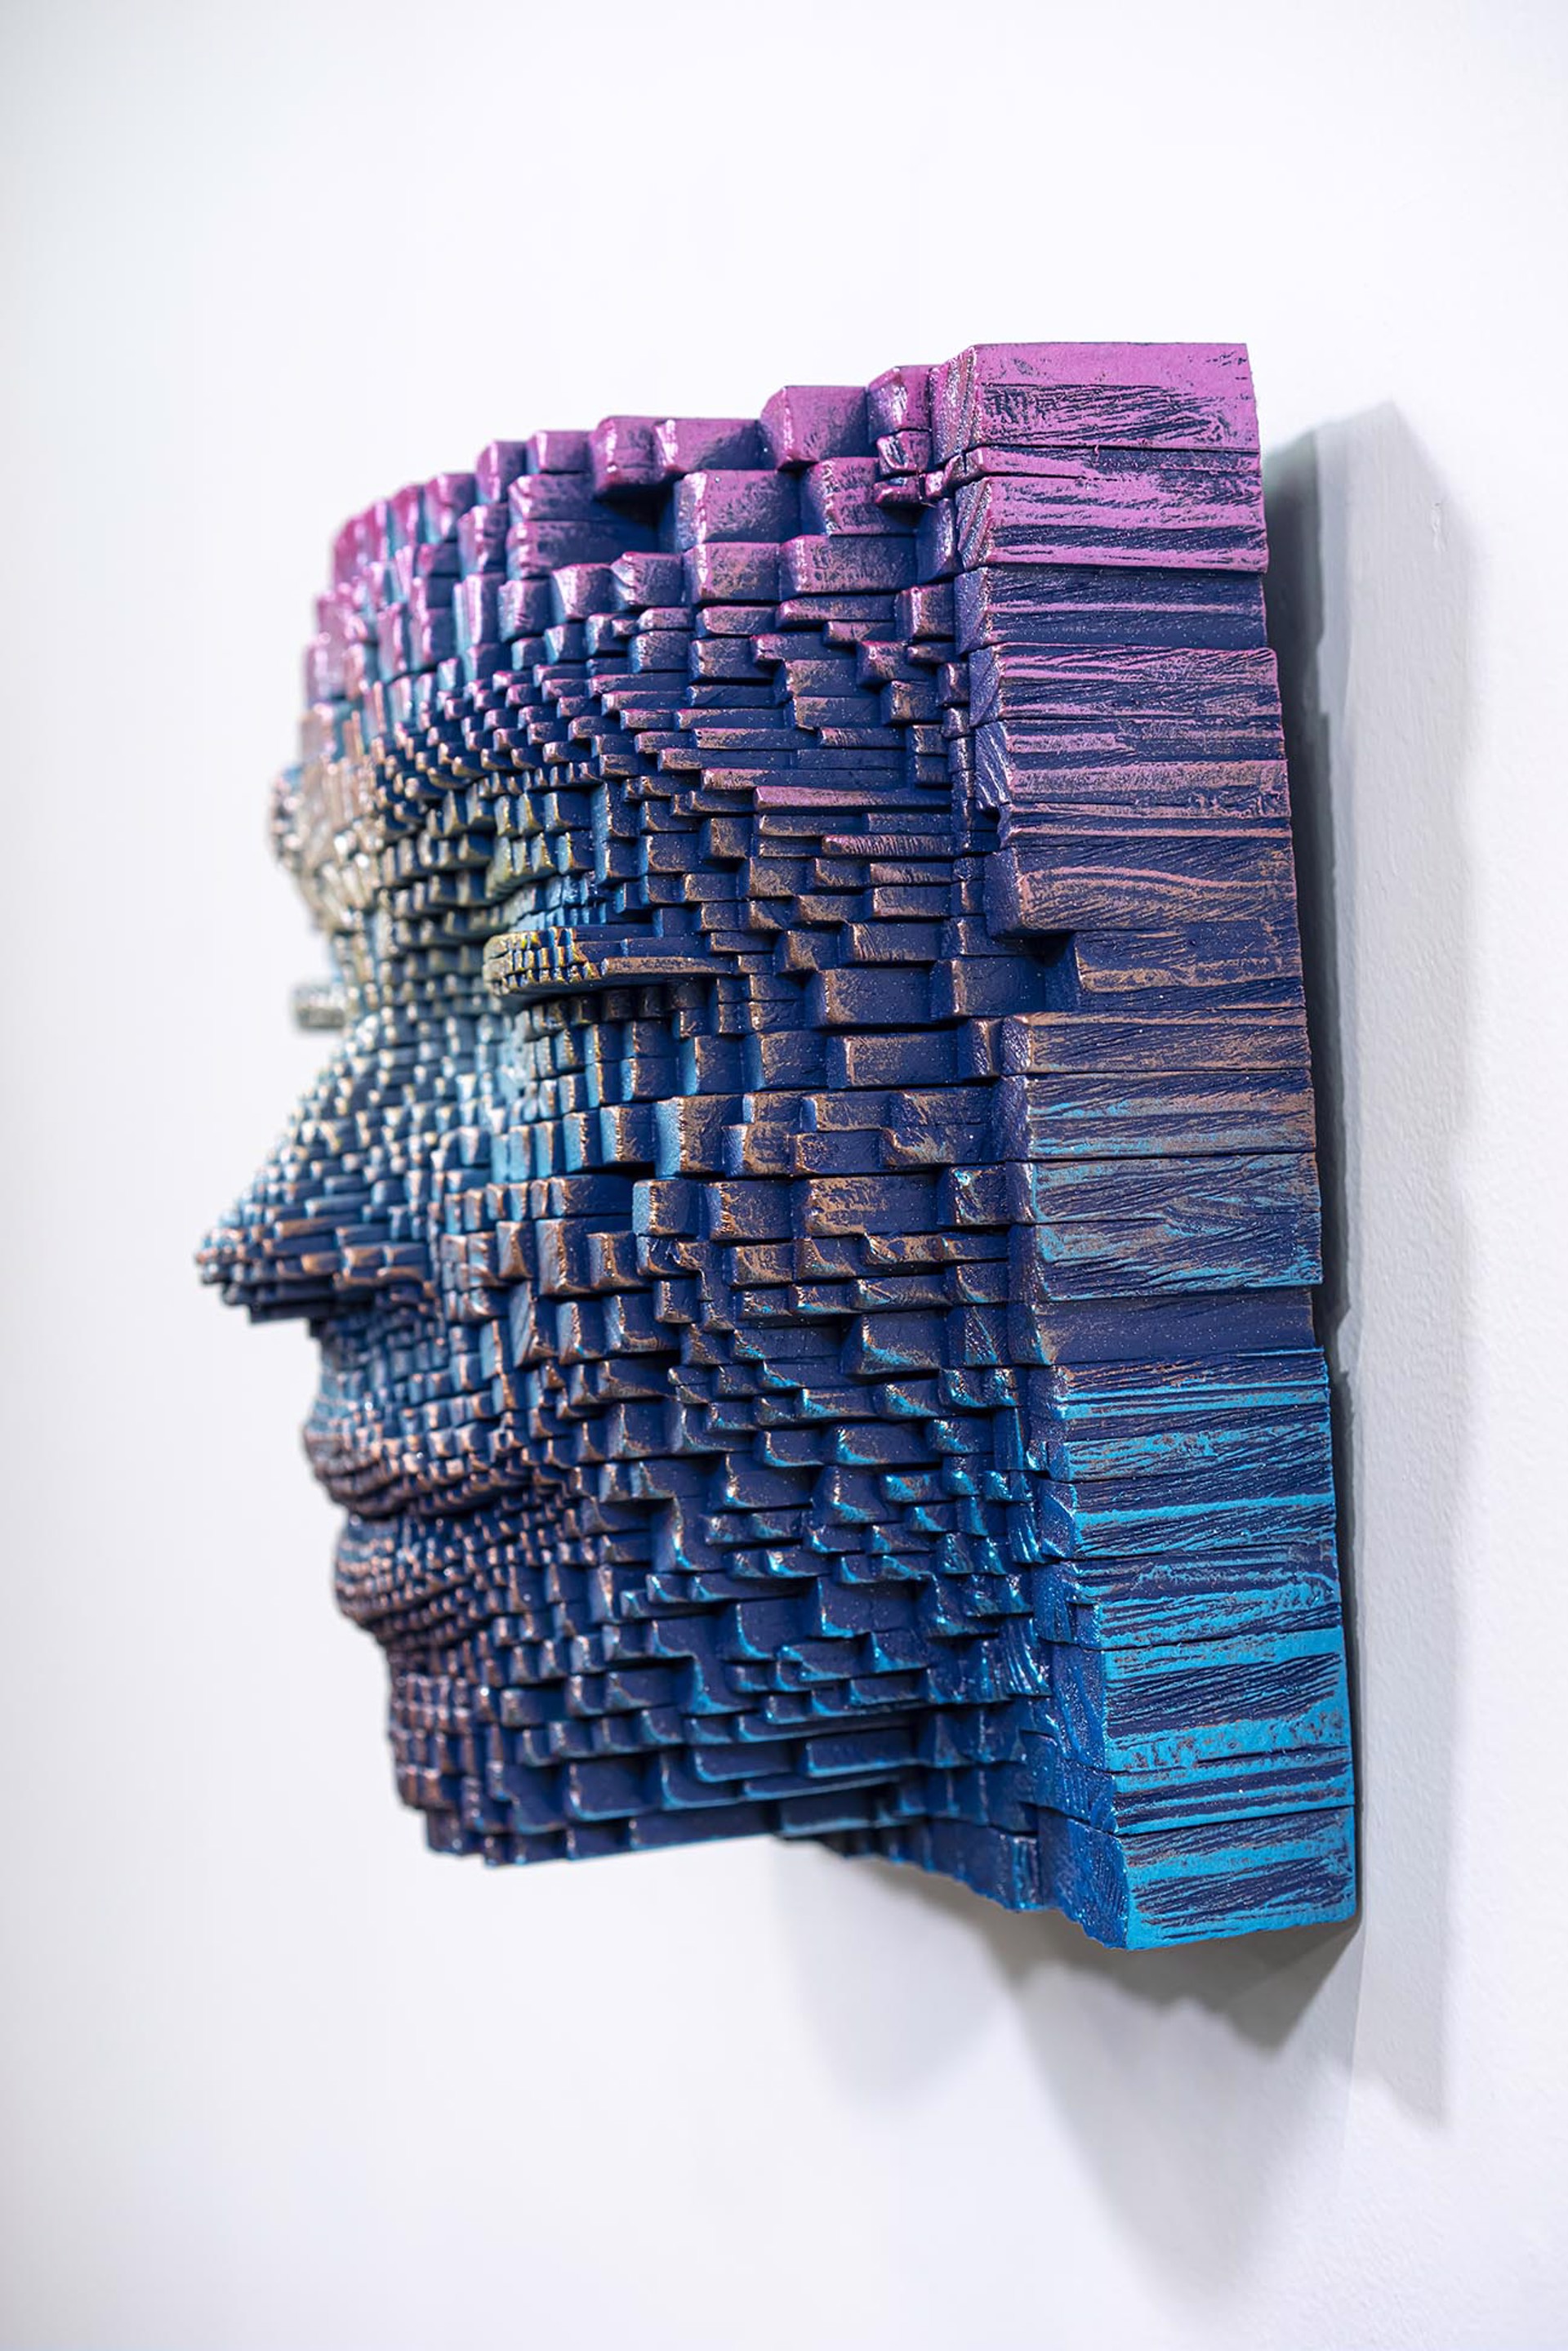 Mask #156 by Gil Bruvel